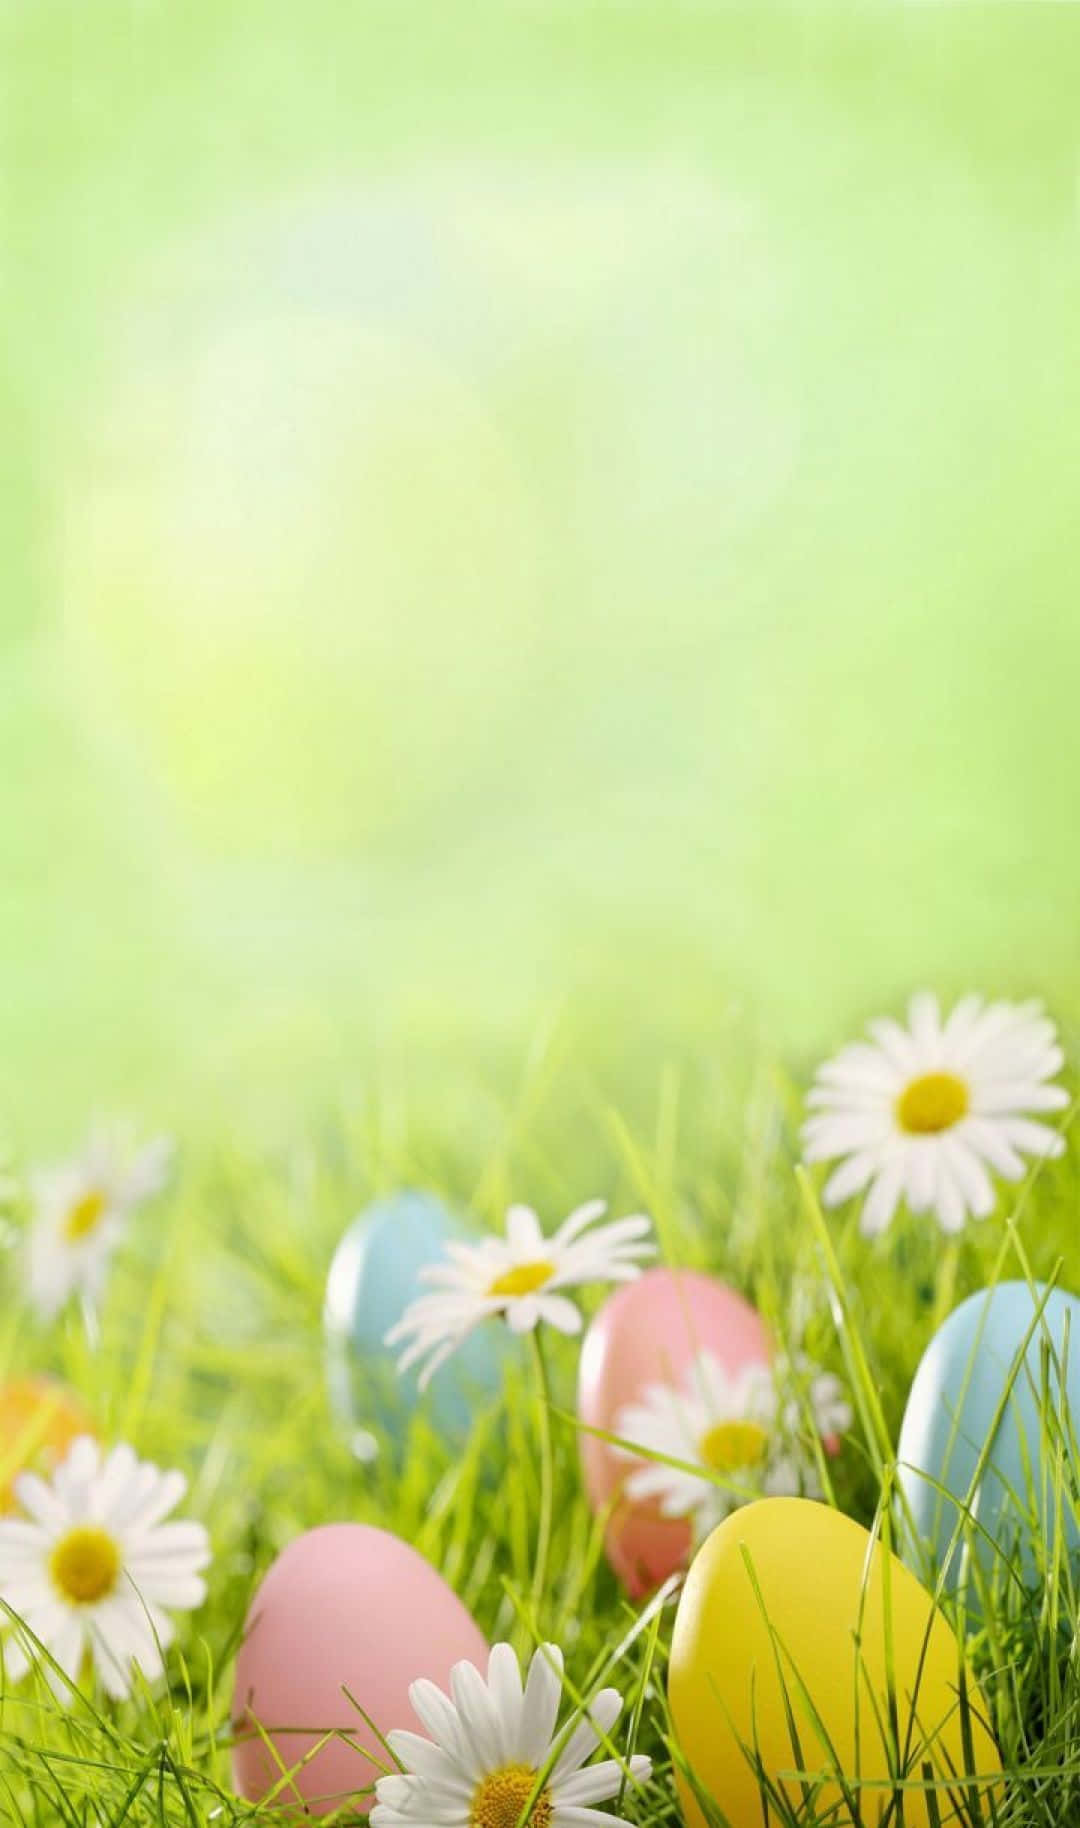 Cute Easter Iphone With Eggs On Grass Wallpaper